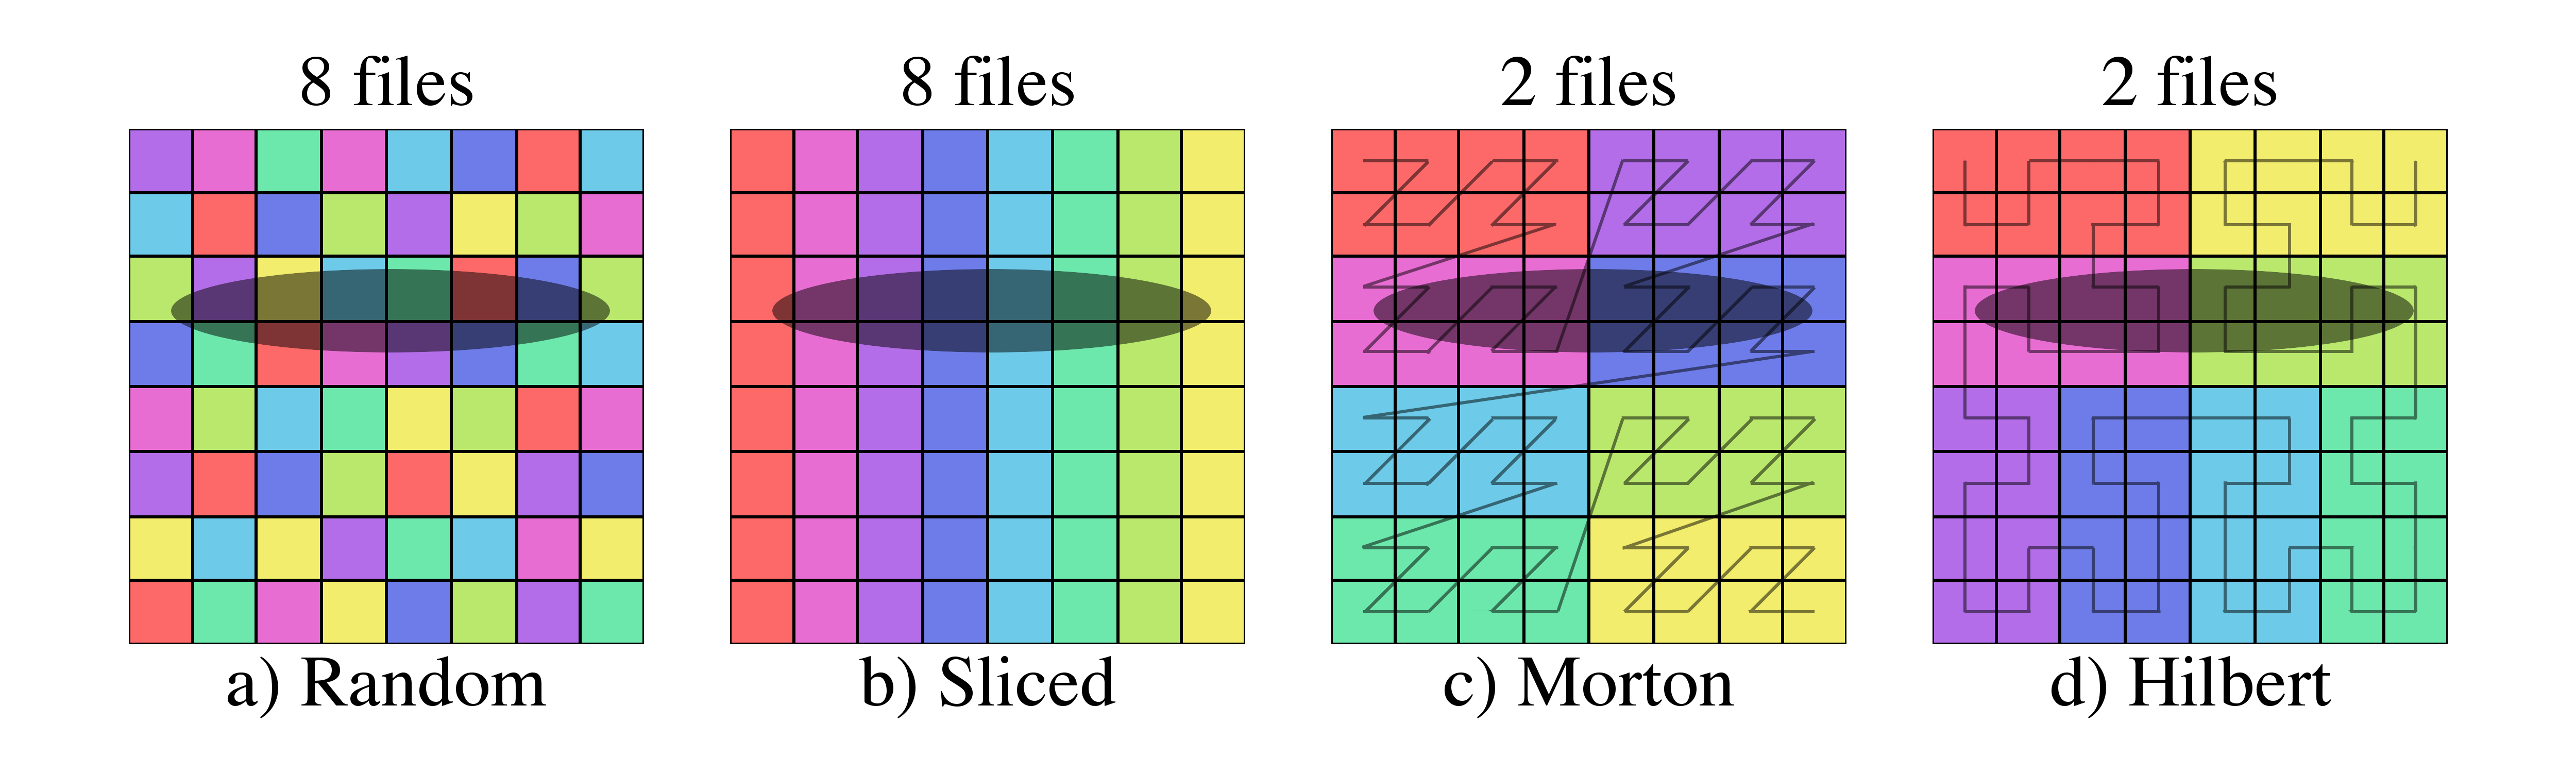 Figure 17: Examples of file selection for four different domain partitions and three different shaded selectors. The number of files above each images is the number of files that must be loaded in order to get all of the data within the selected region.